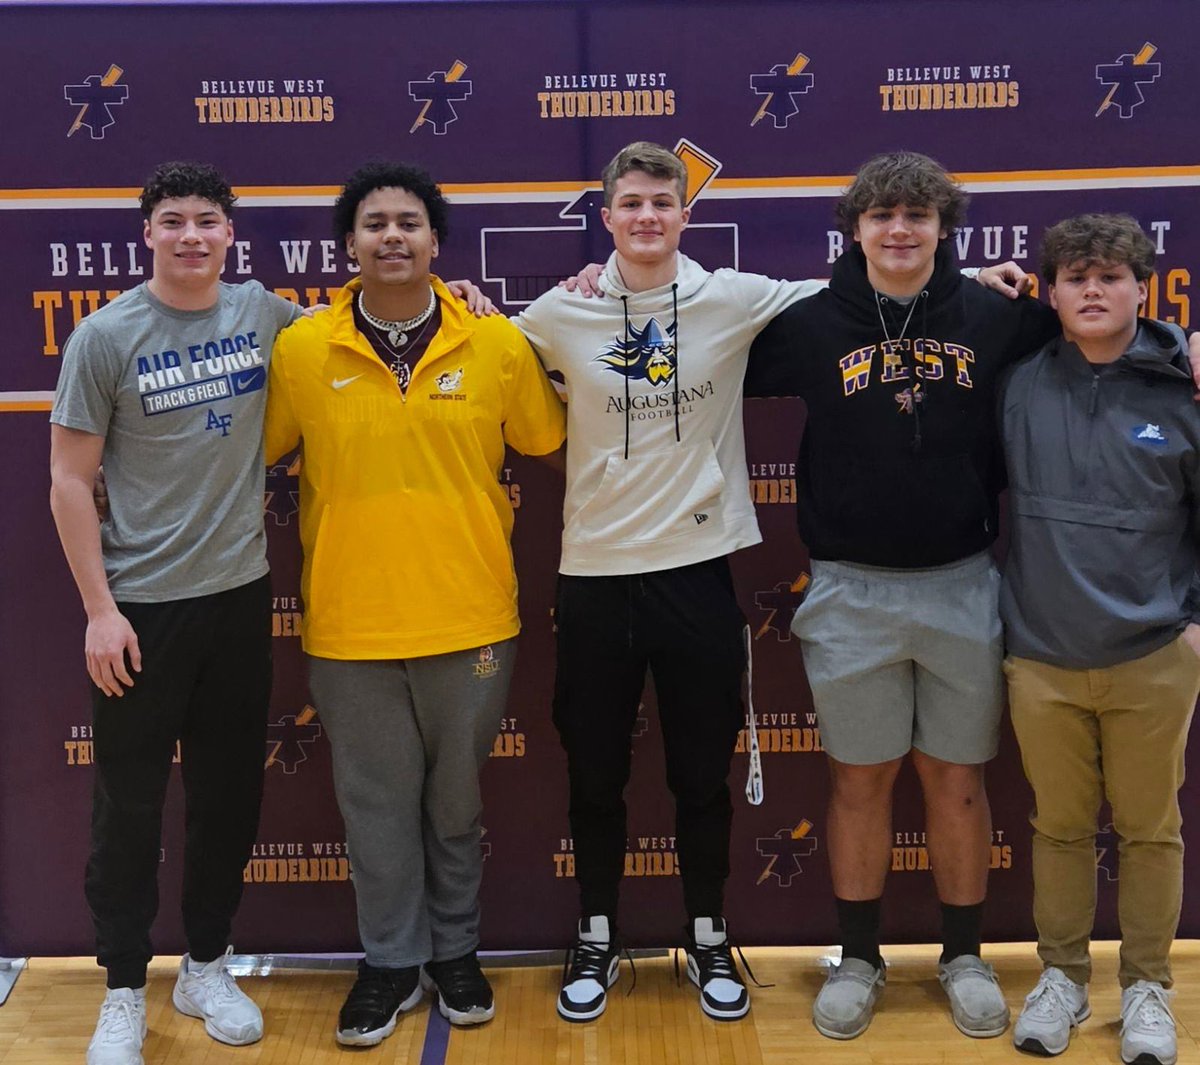 Congrats to all these #PlaymakersInPurple who are continuing on with the football journeys! Very proud of all of you!!!